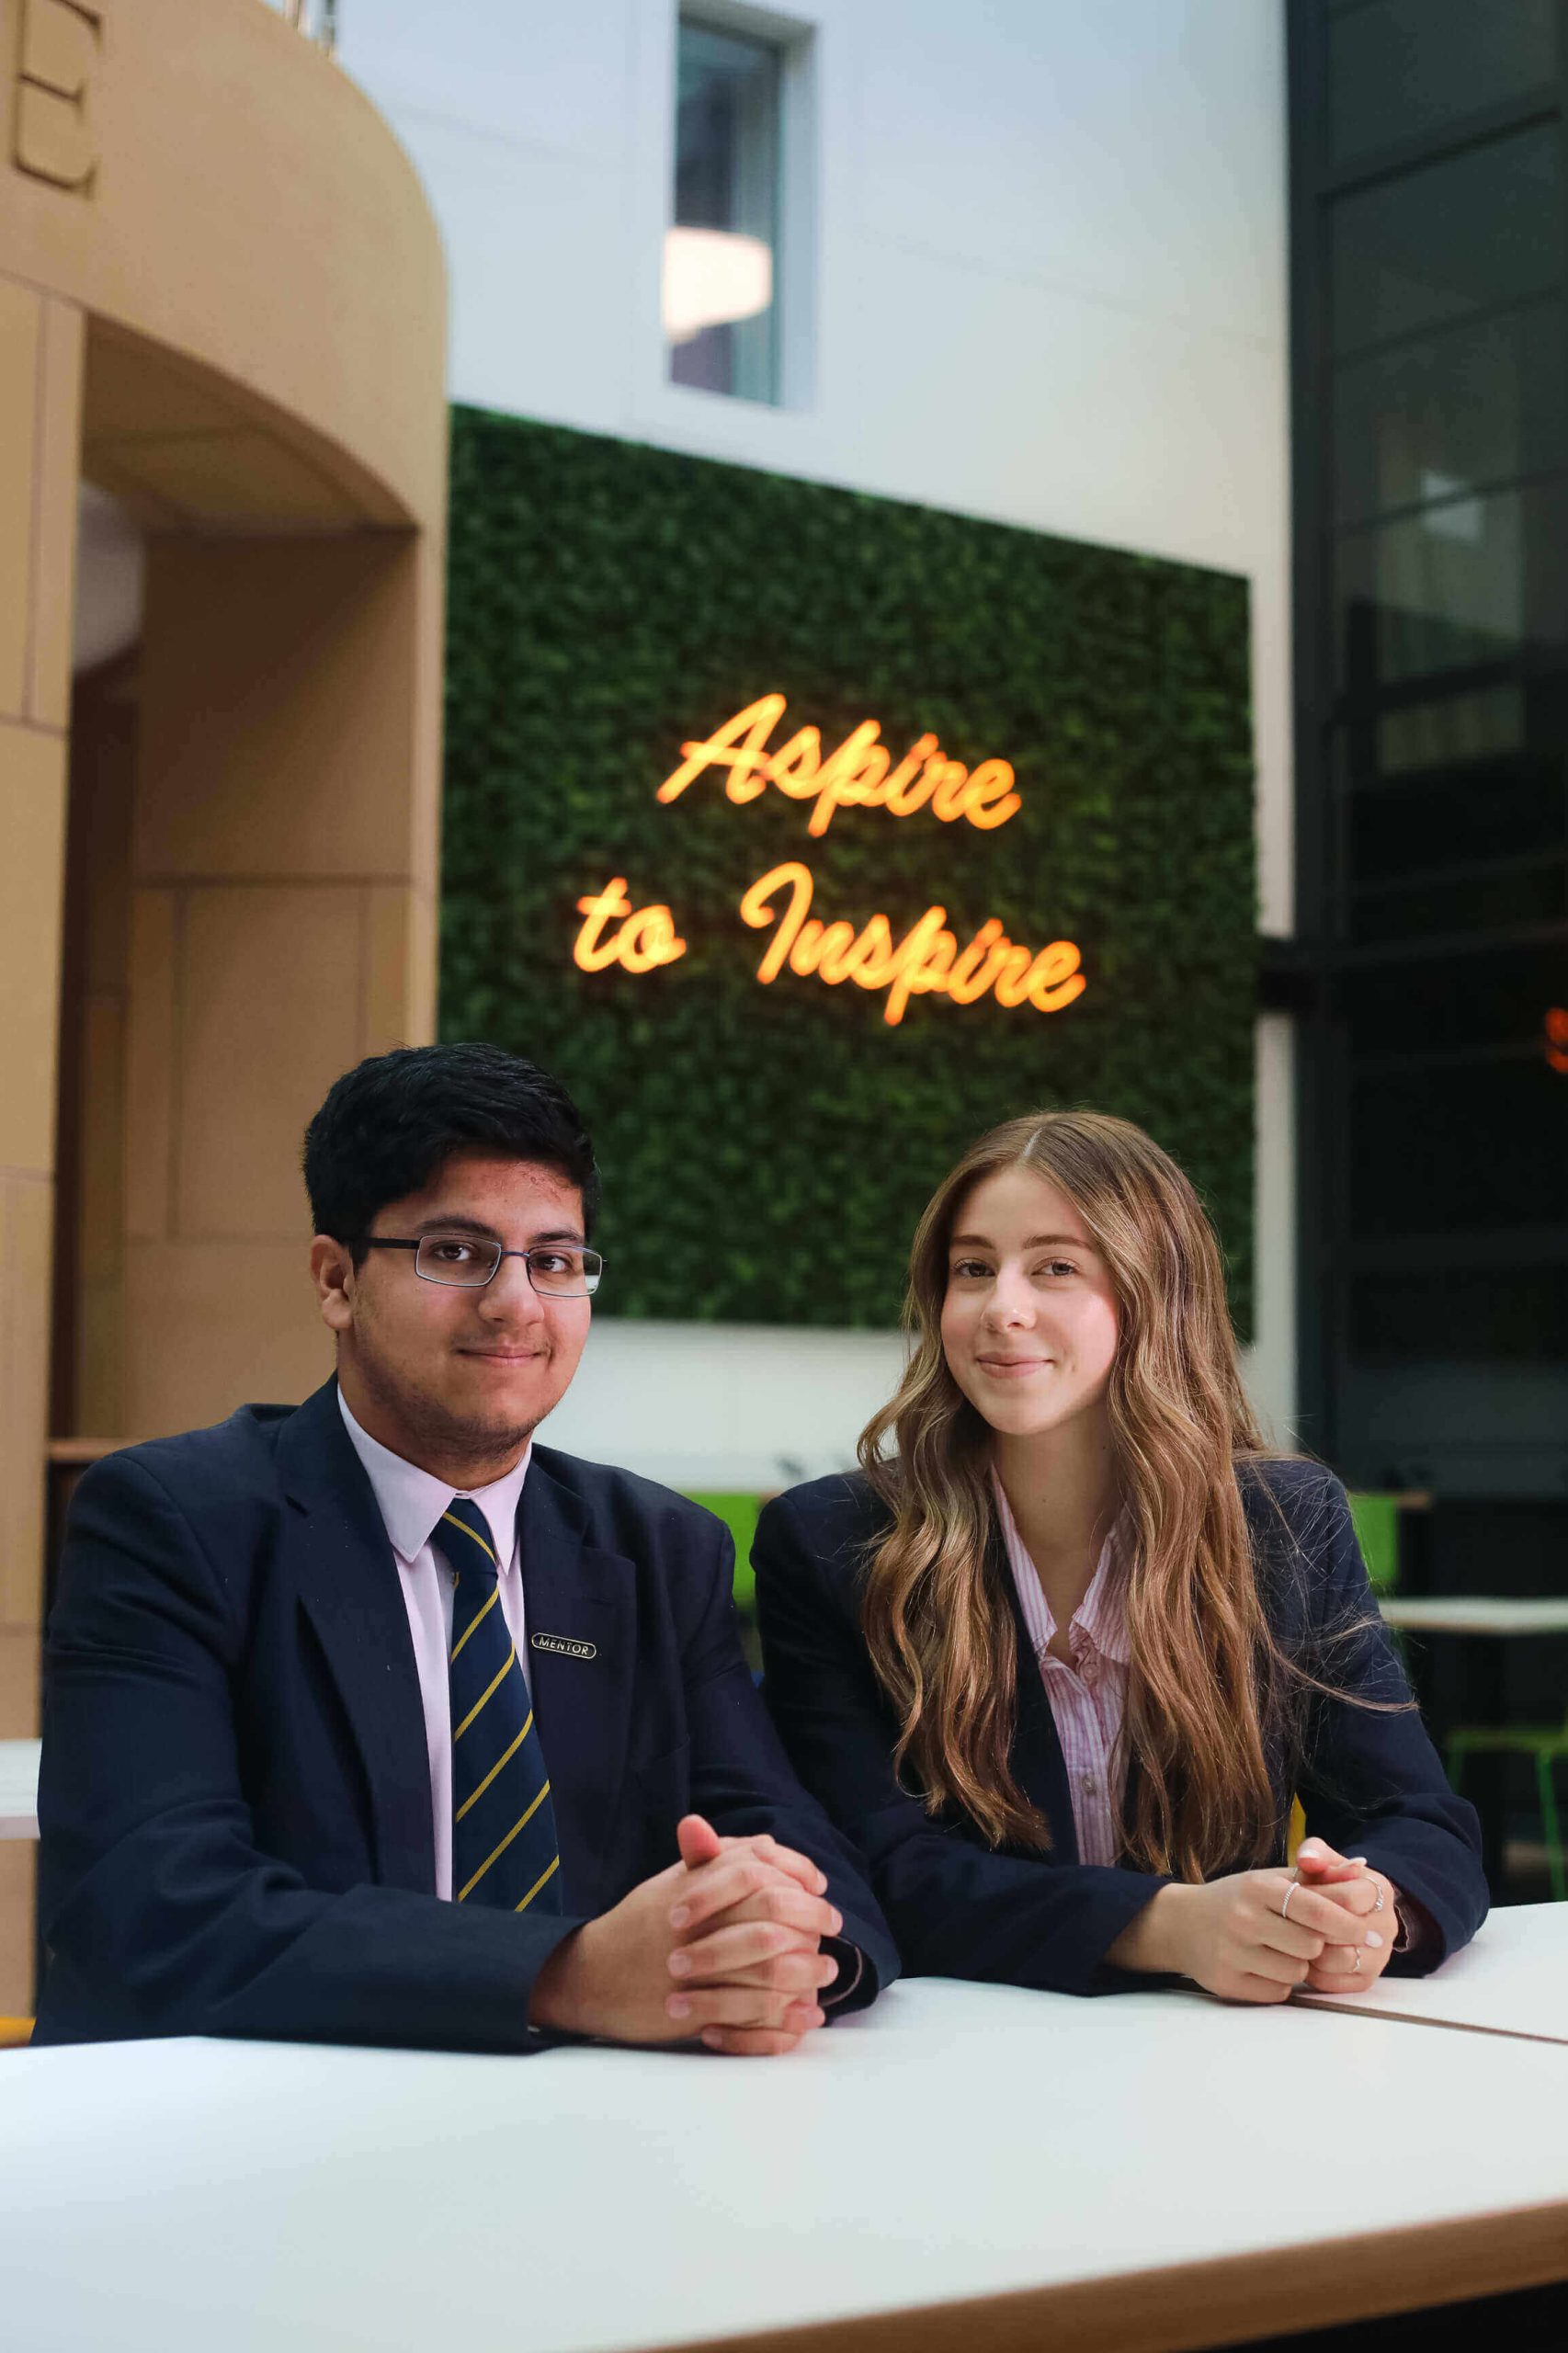 Sixth Form students sat smiling beneath the 'Aspire to Inspire' sign.